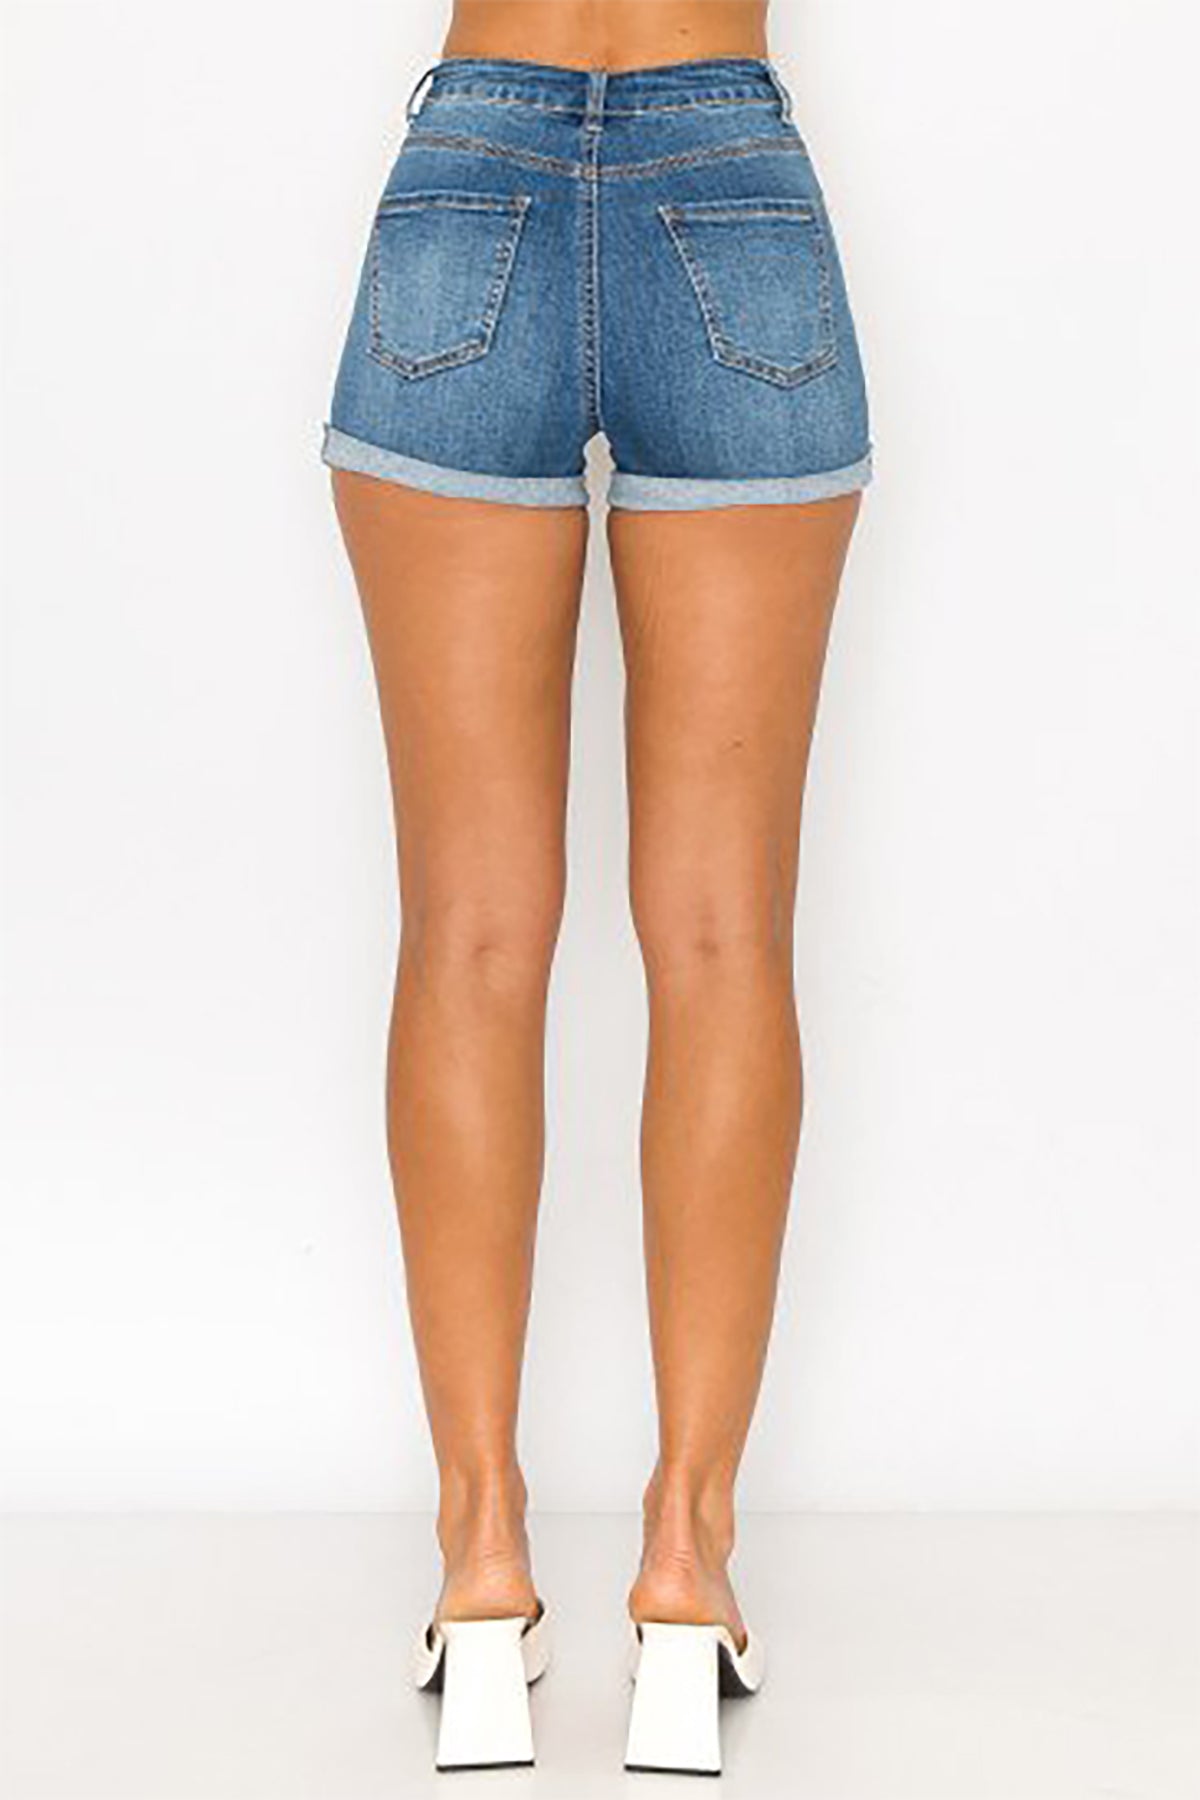 DISTRESSED SHORTS WITH ROLLED CUFFS 2-2-2